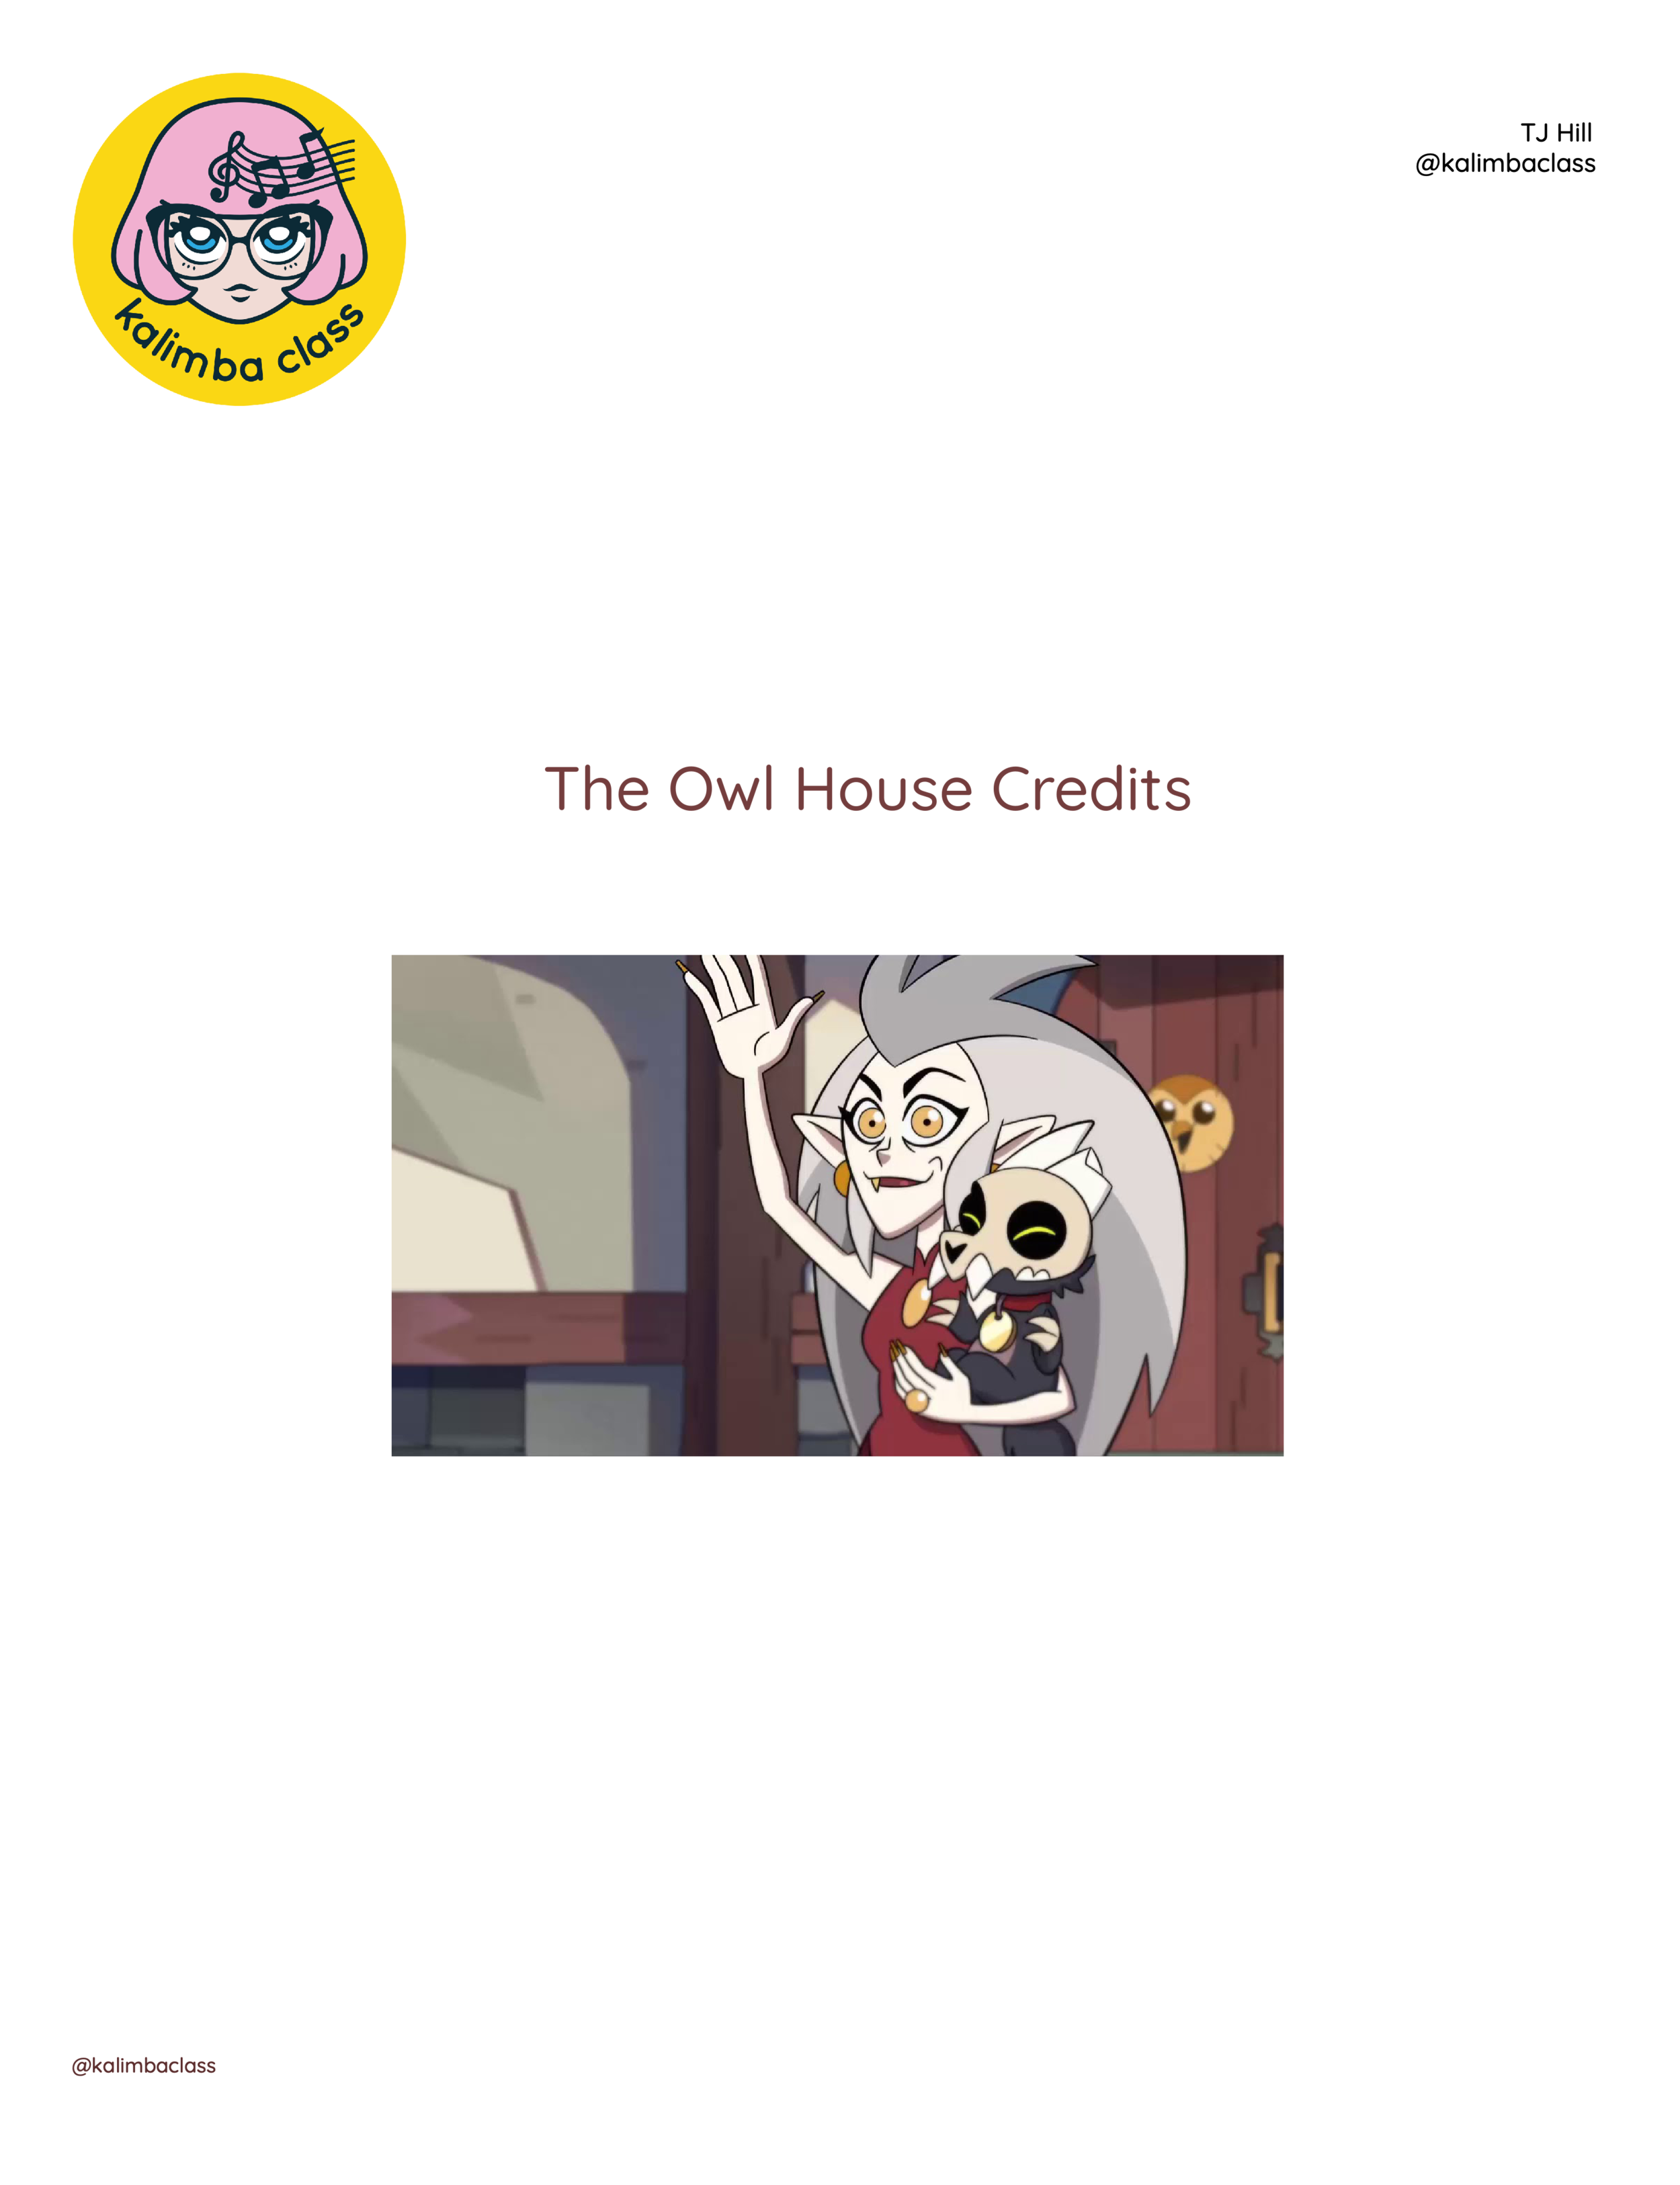 The Owl House Credits - TJ Hill